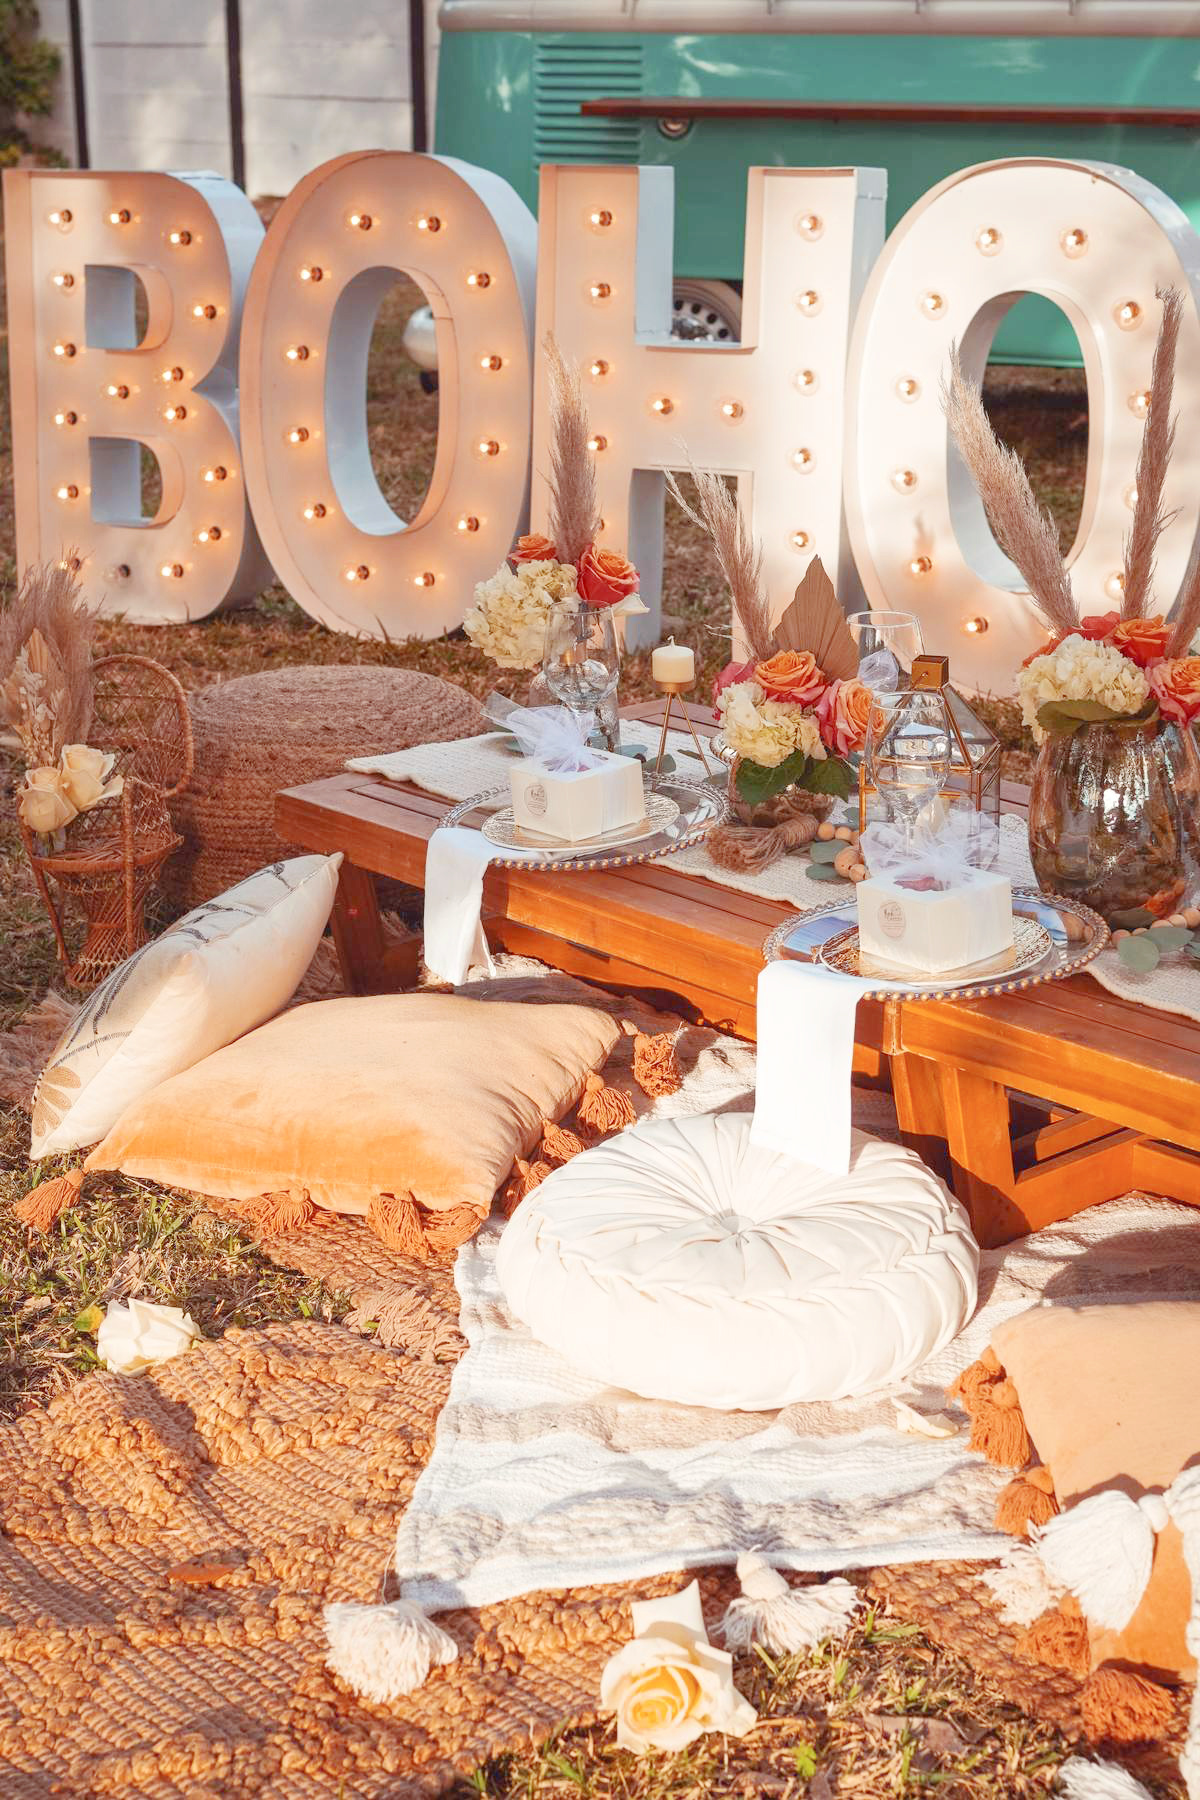 Best Party Themes for Adults - Boho Picnic Parties